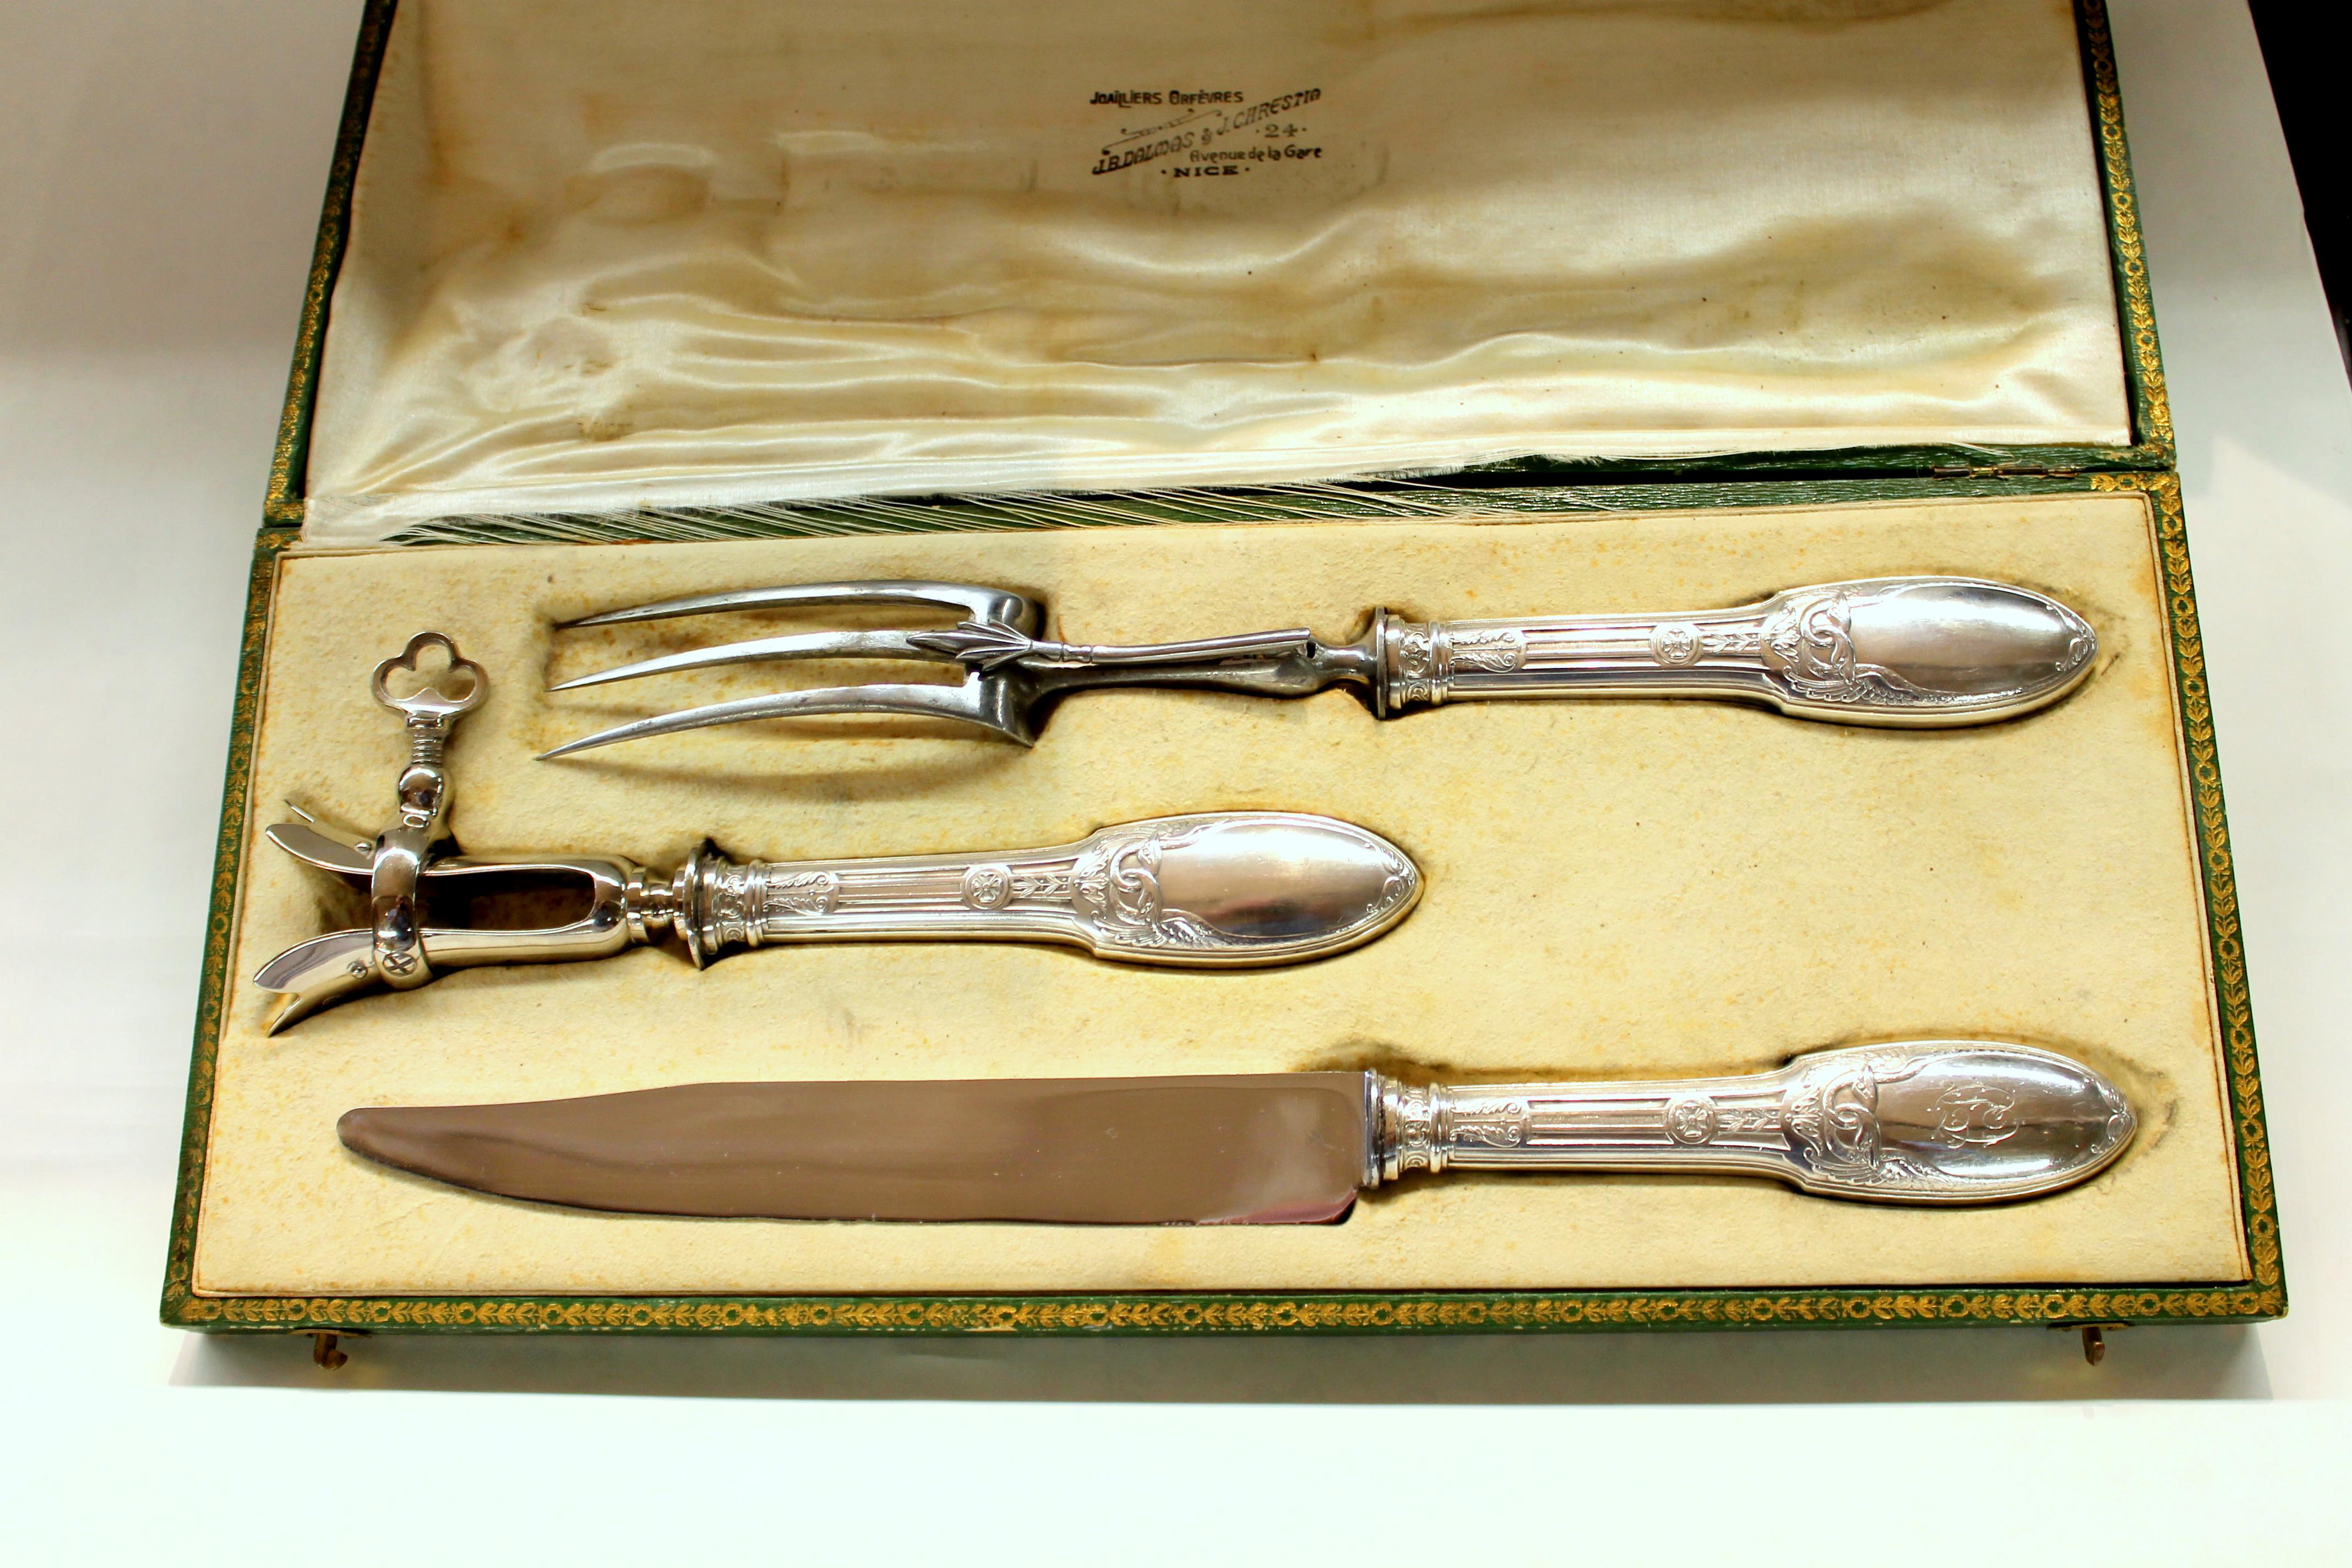 Old French .950 fine silver handle three-piece carving set with Gigot (bone holder); Maker's Marks for Societe Parisienne d'Orfevrerie
98 rue Vielle-du-Temple -PARIS-
and the 